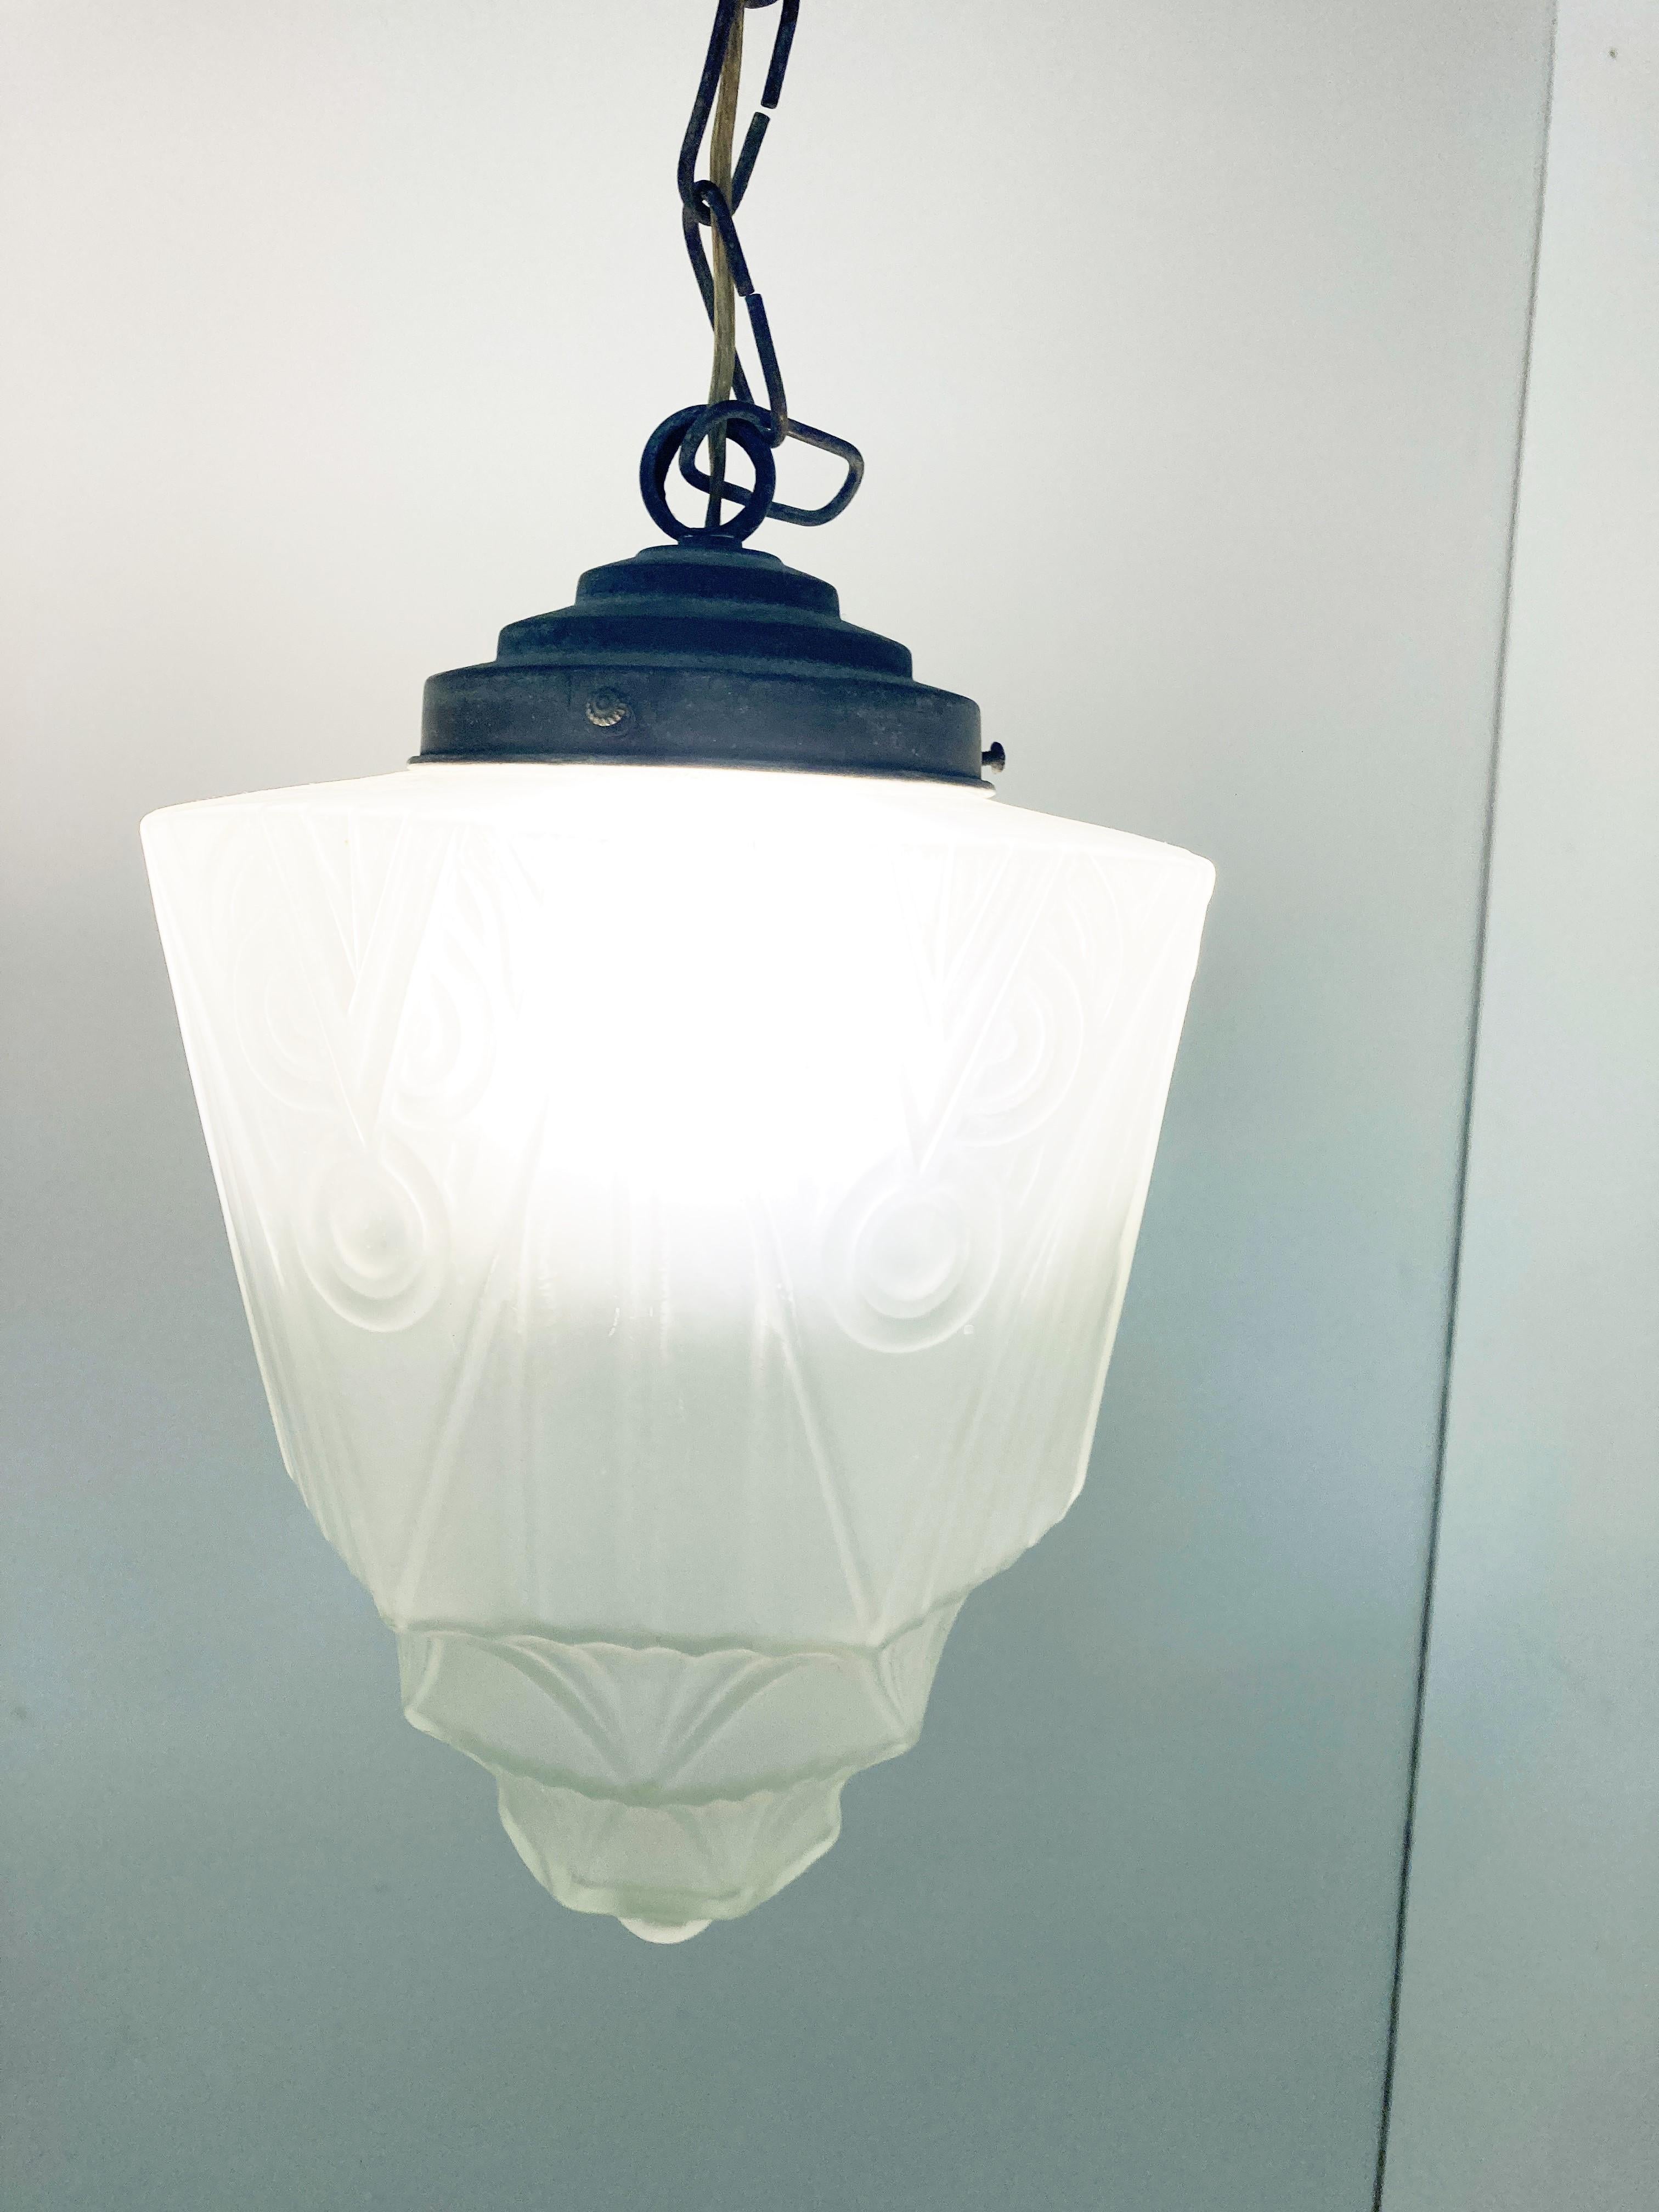 Antique Art Deco hallway pendant light.

This lamp is very typical for the Art Deco era and these lamps where usually hung in hallways or at front door entrances

The lamp has the original copper shade holder with ceiling cap.

The shade emits